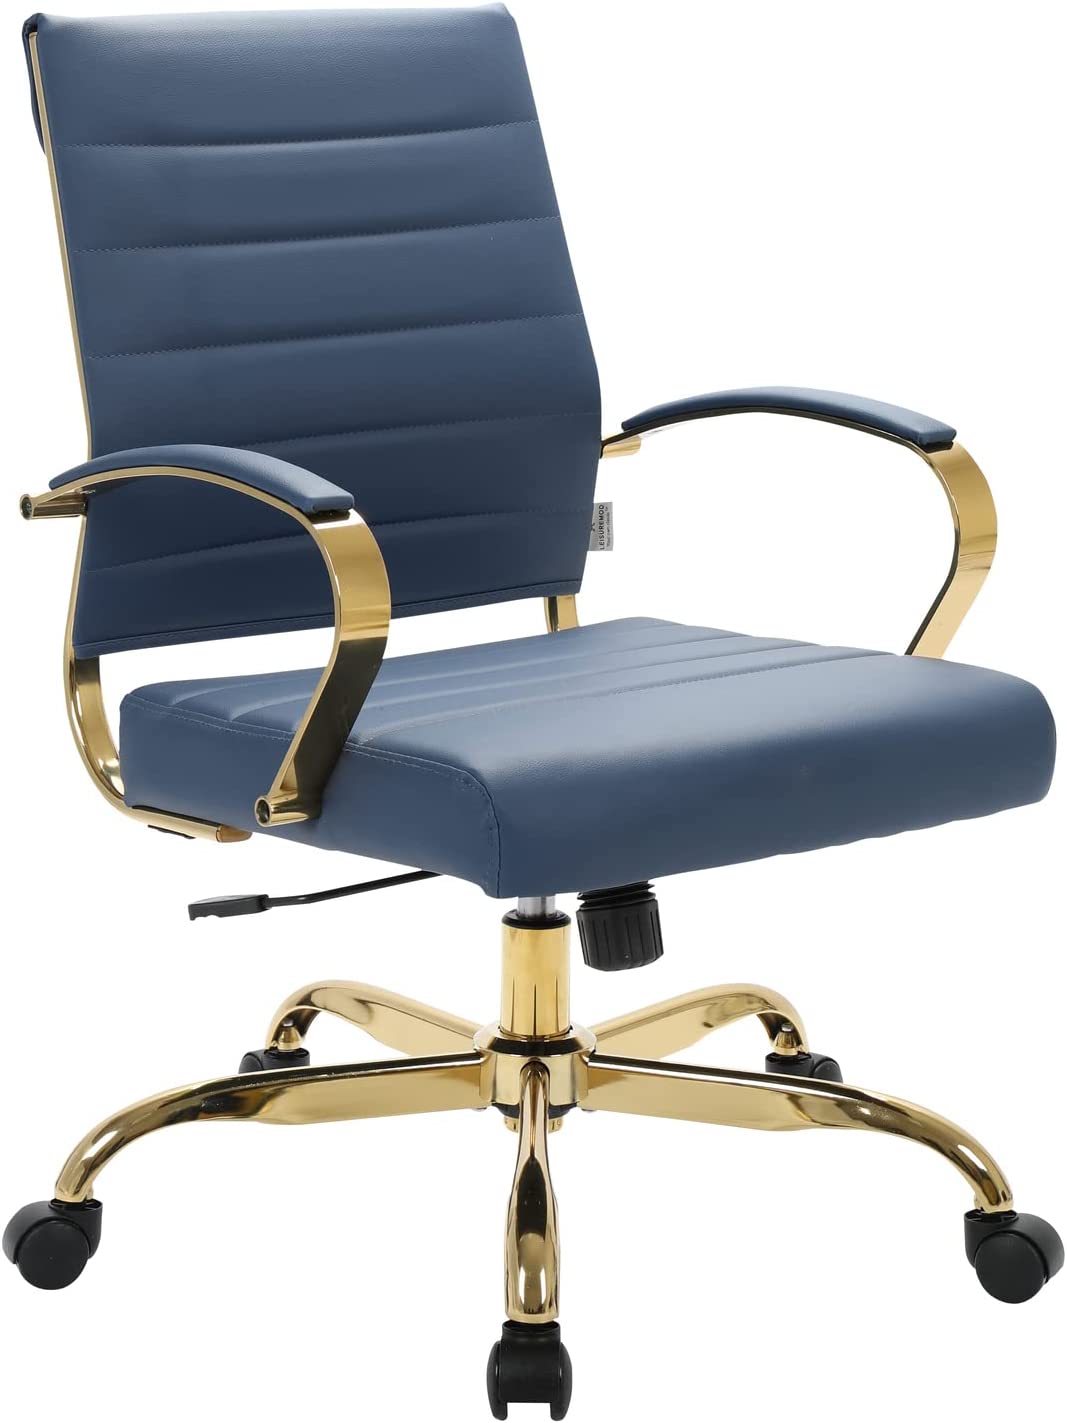 Adjustable Swivel Leather Office Chair